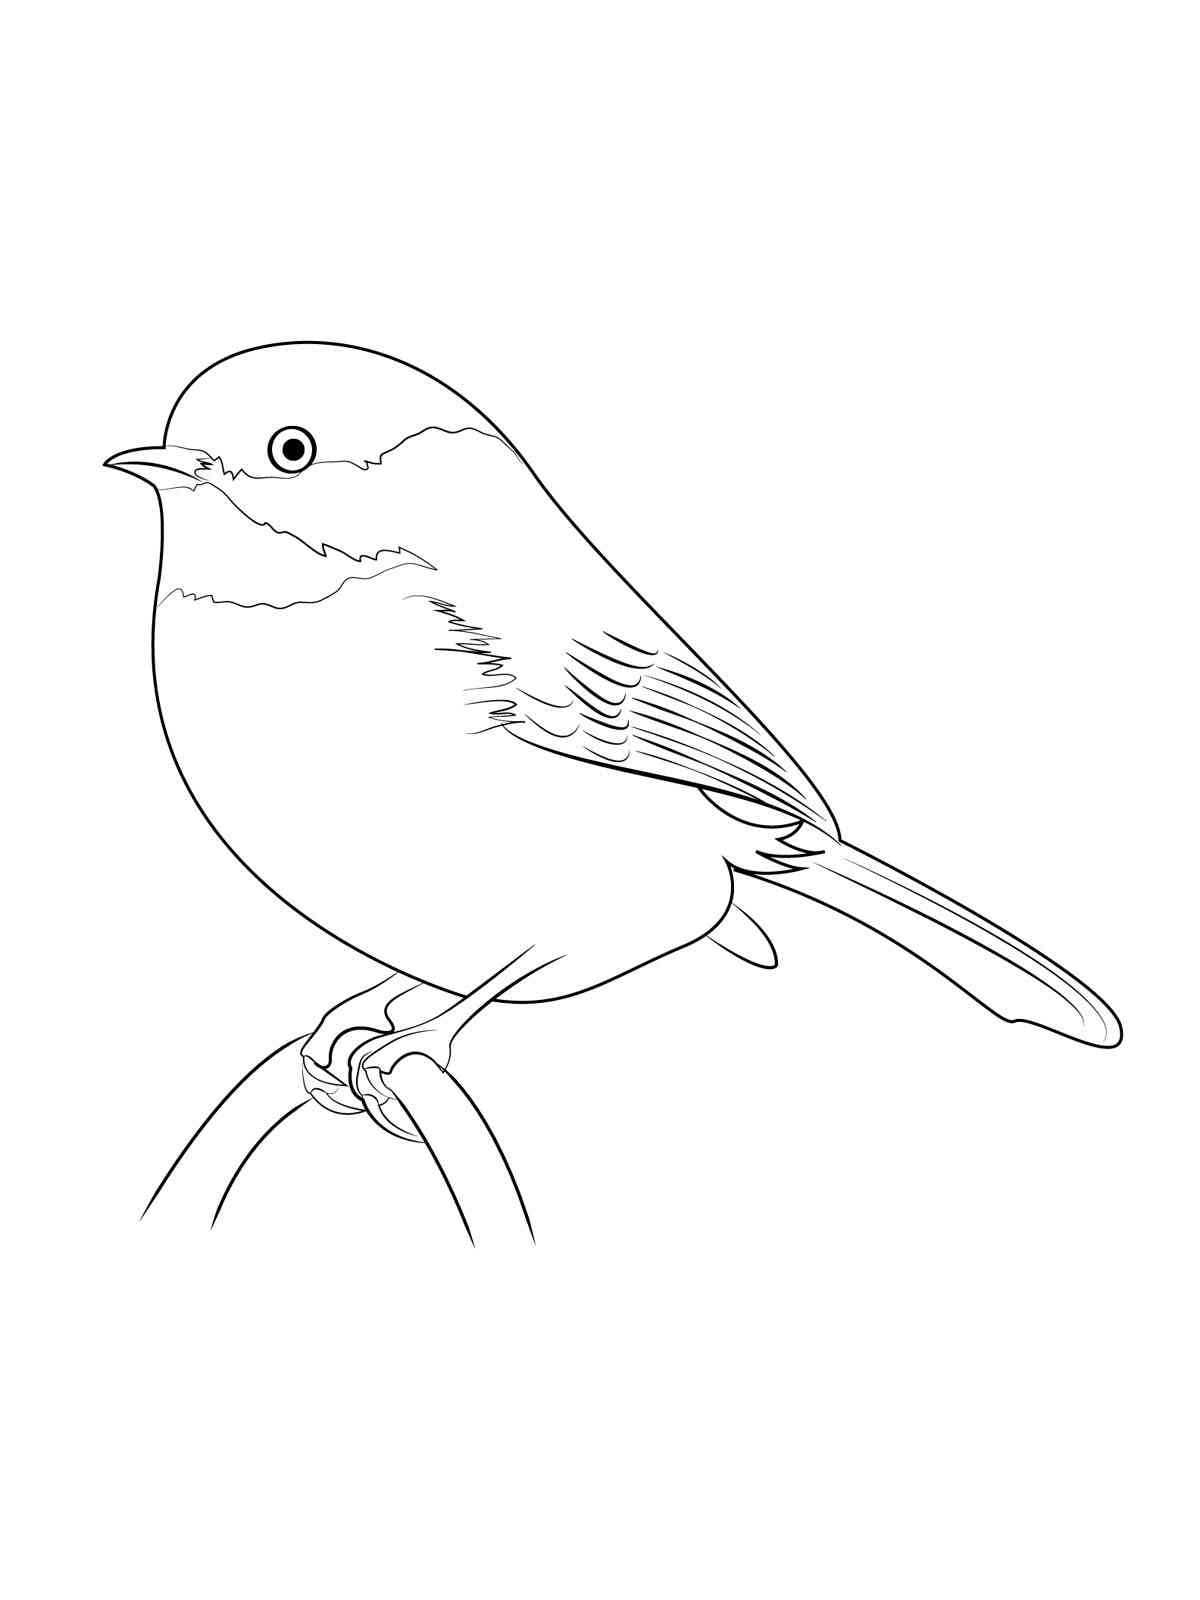 Easy Chickadee coloring page